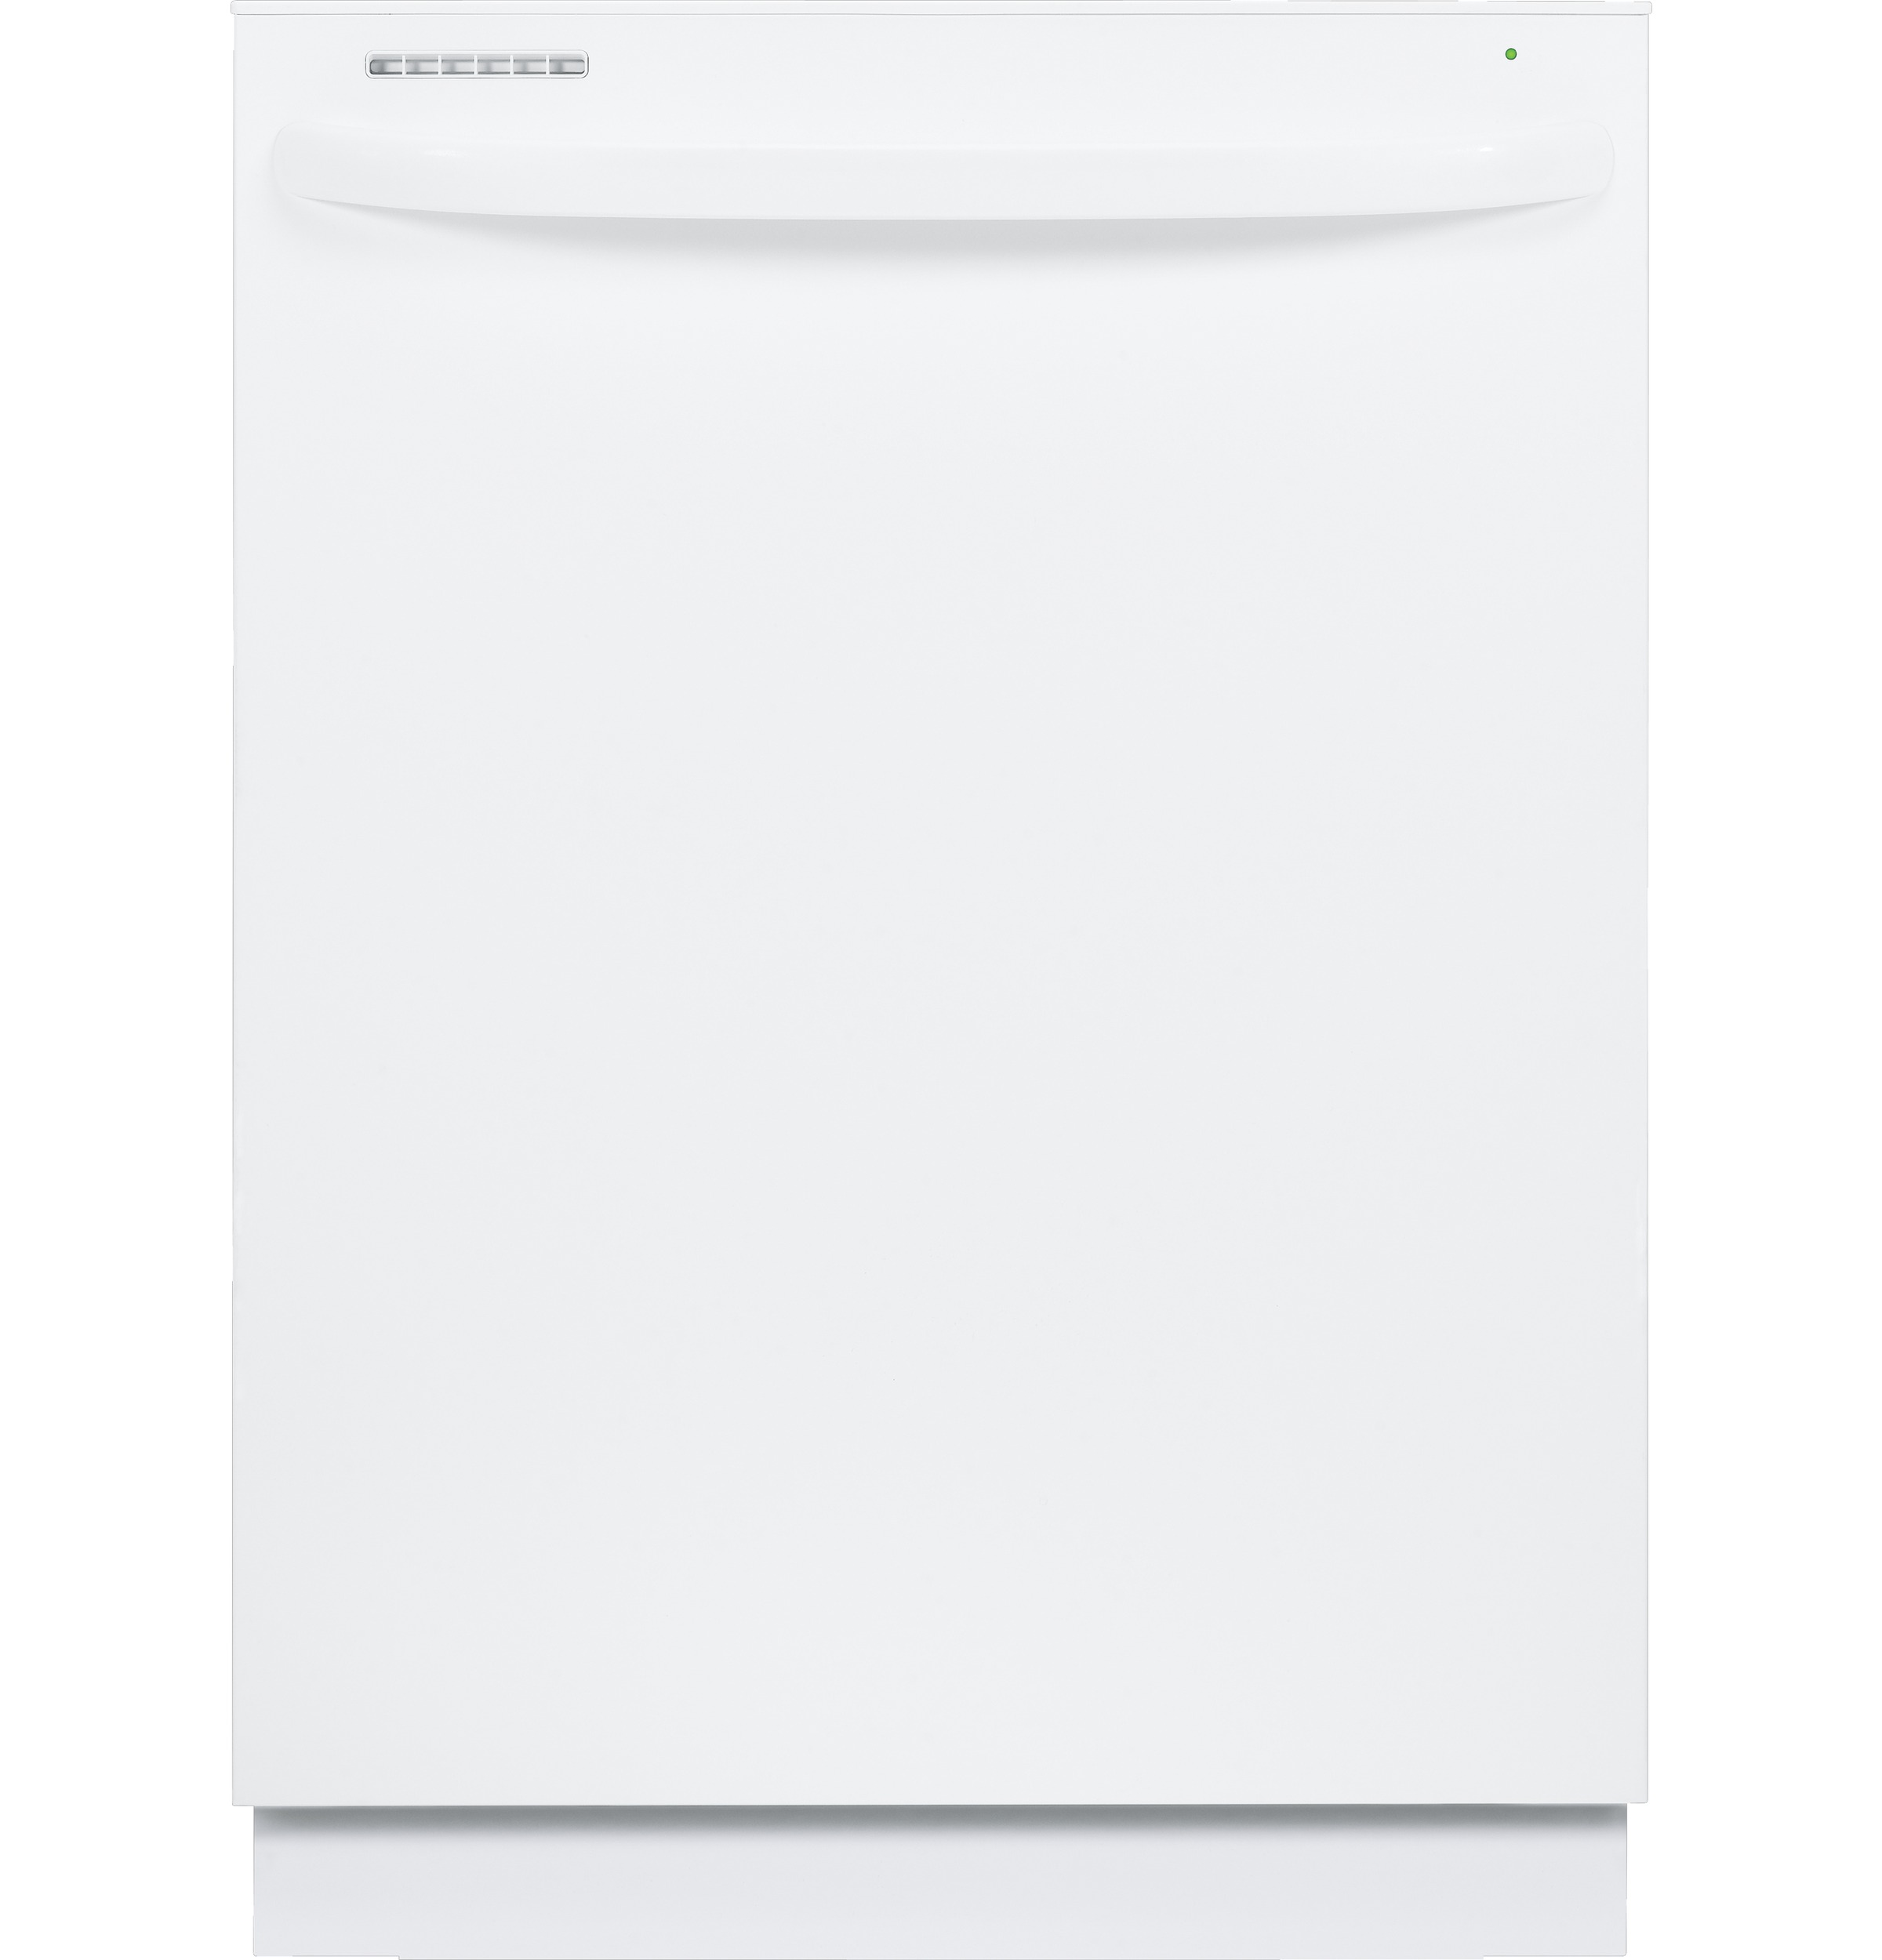 GE® Built-In Dishwasher with Hidden Controls